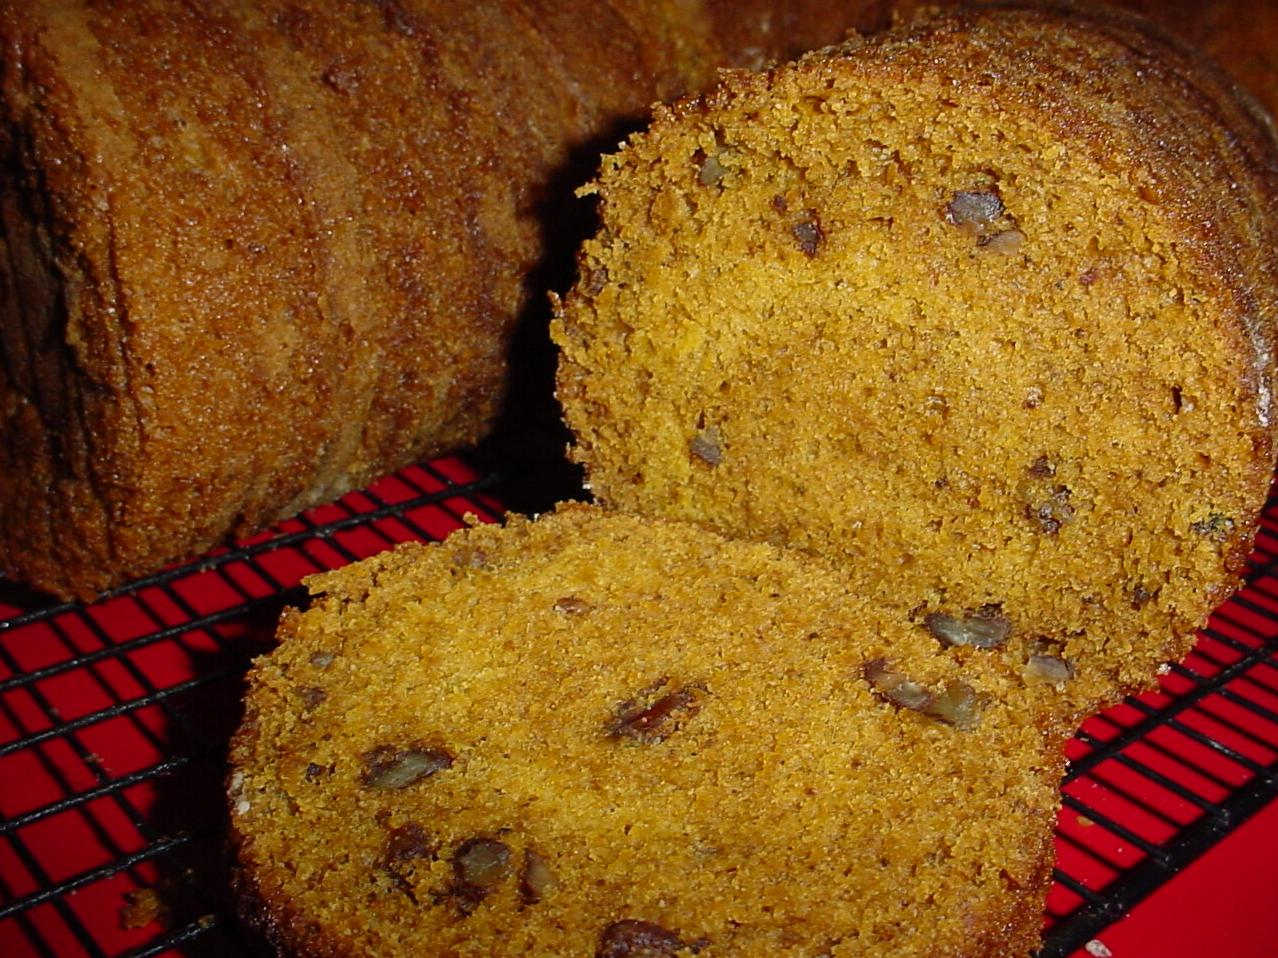  Smell the aroma of fall with this delicious pumpkin bread recipe!